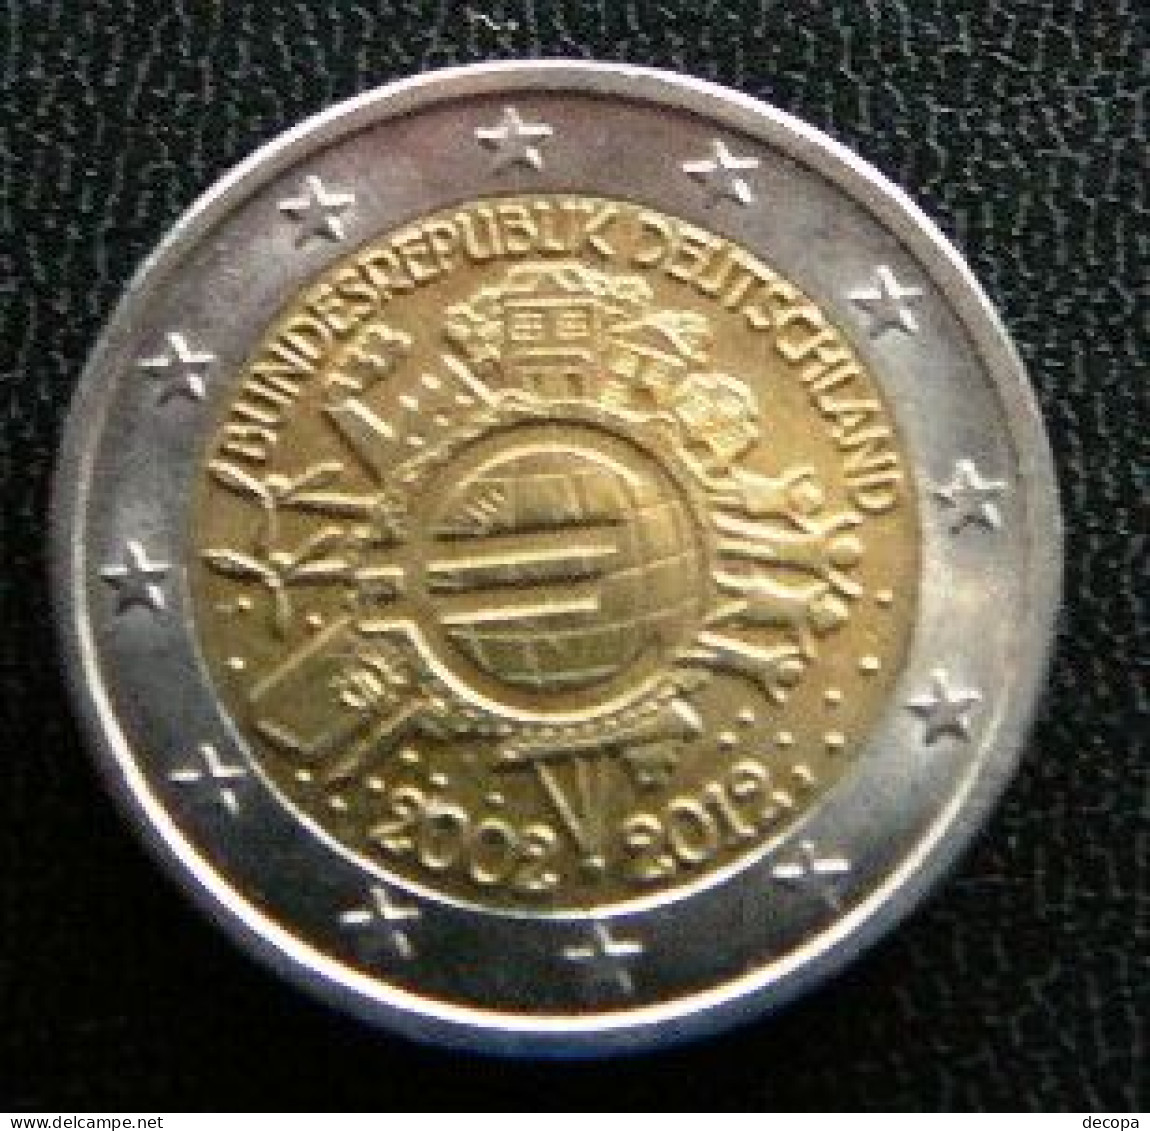 Germany - Allemagne - Duitsland   2 EURO 2012 J   10 Years Euro      Speciale Uitgave - Commemorative - Deutschland